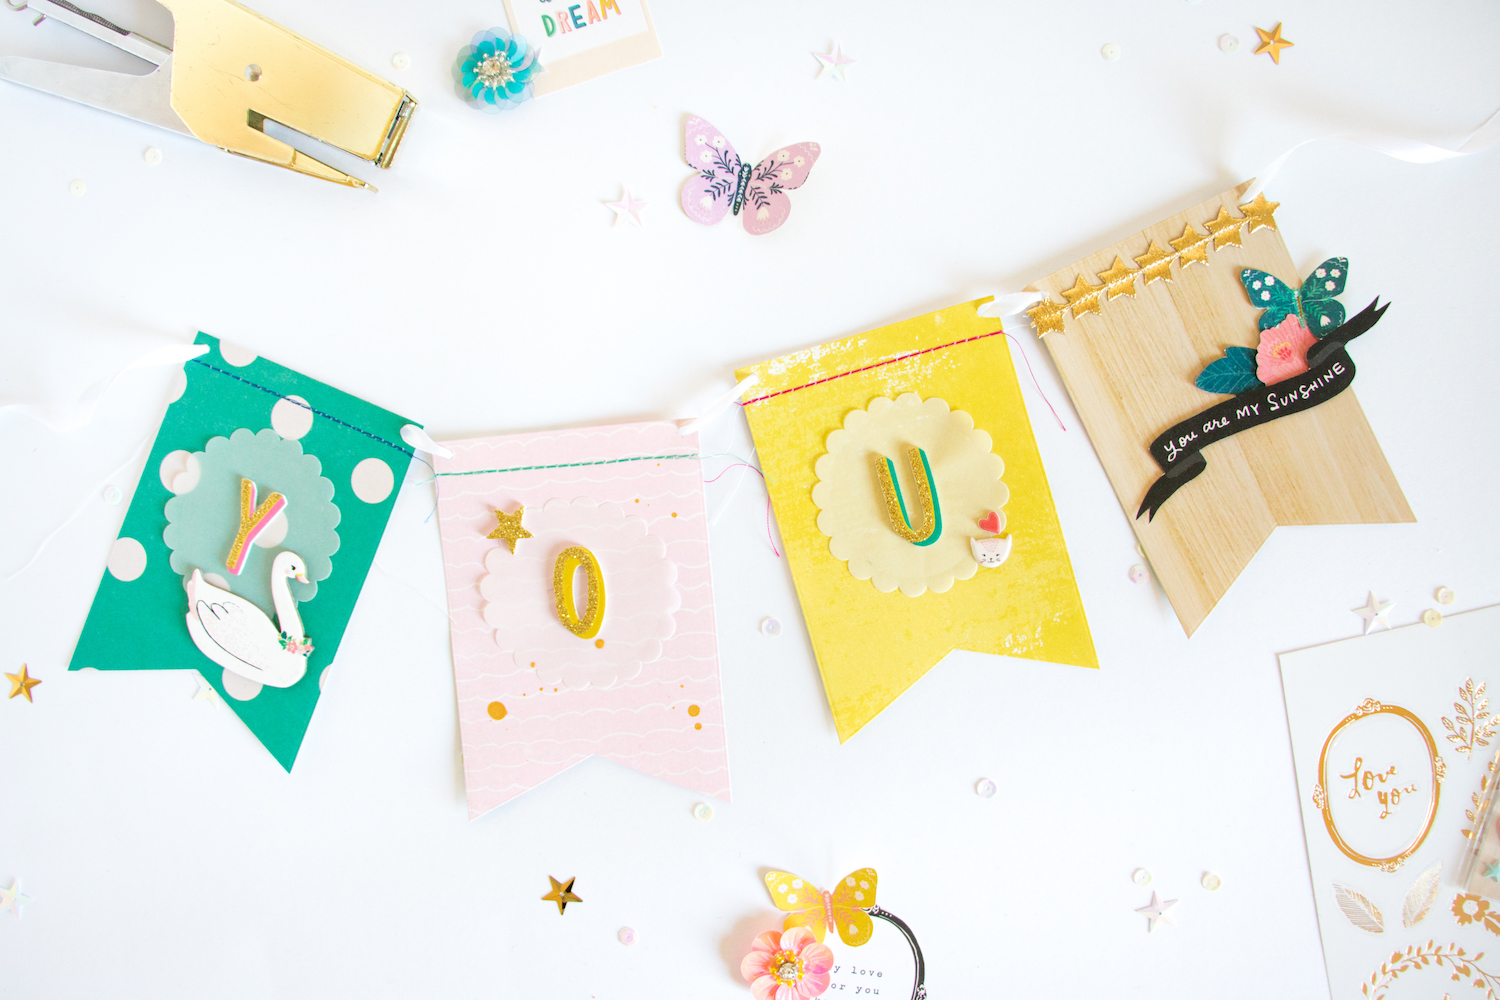 Mini Album Banner by ScatteredConfetti. // #scrapbooking #cratepaper #maggieholmes